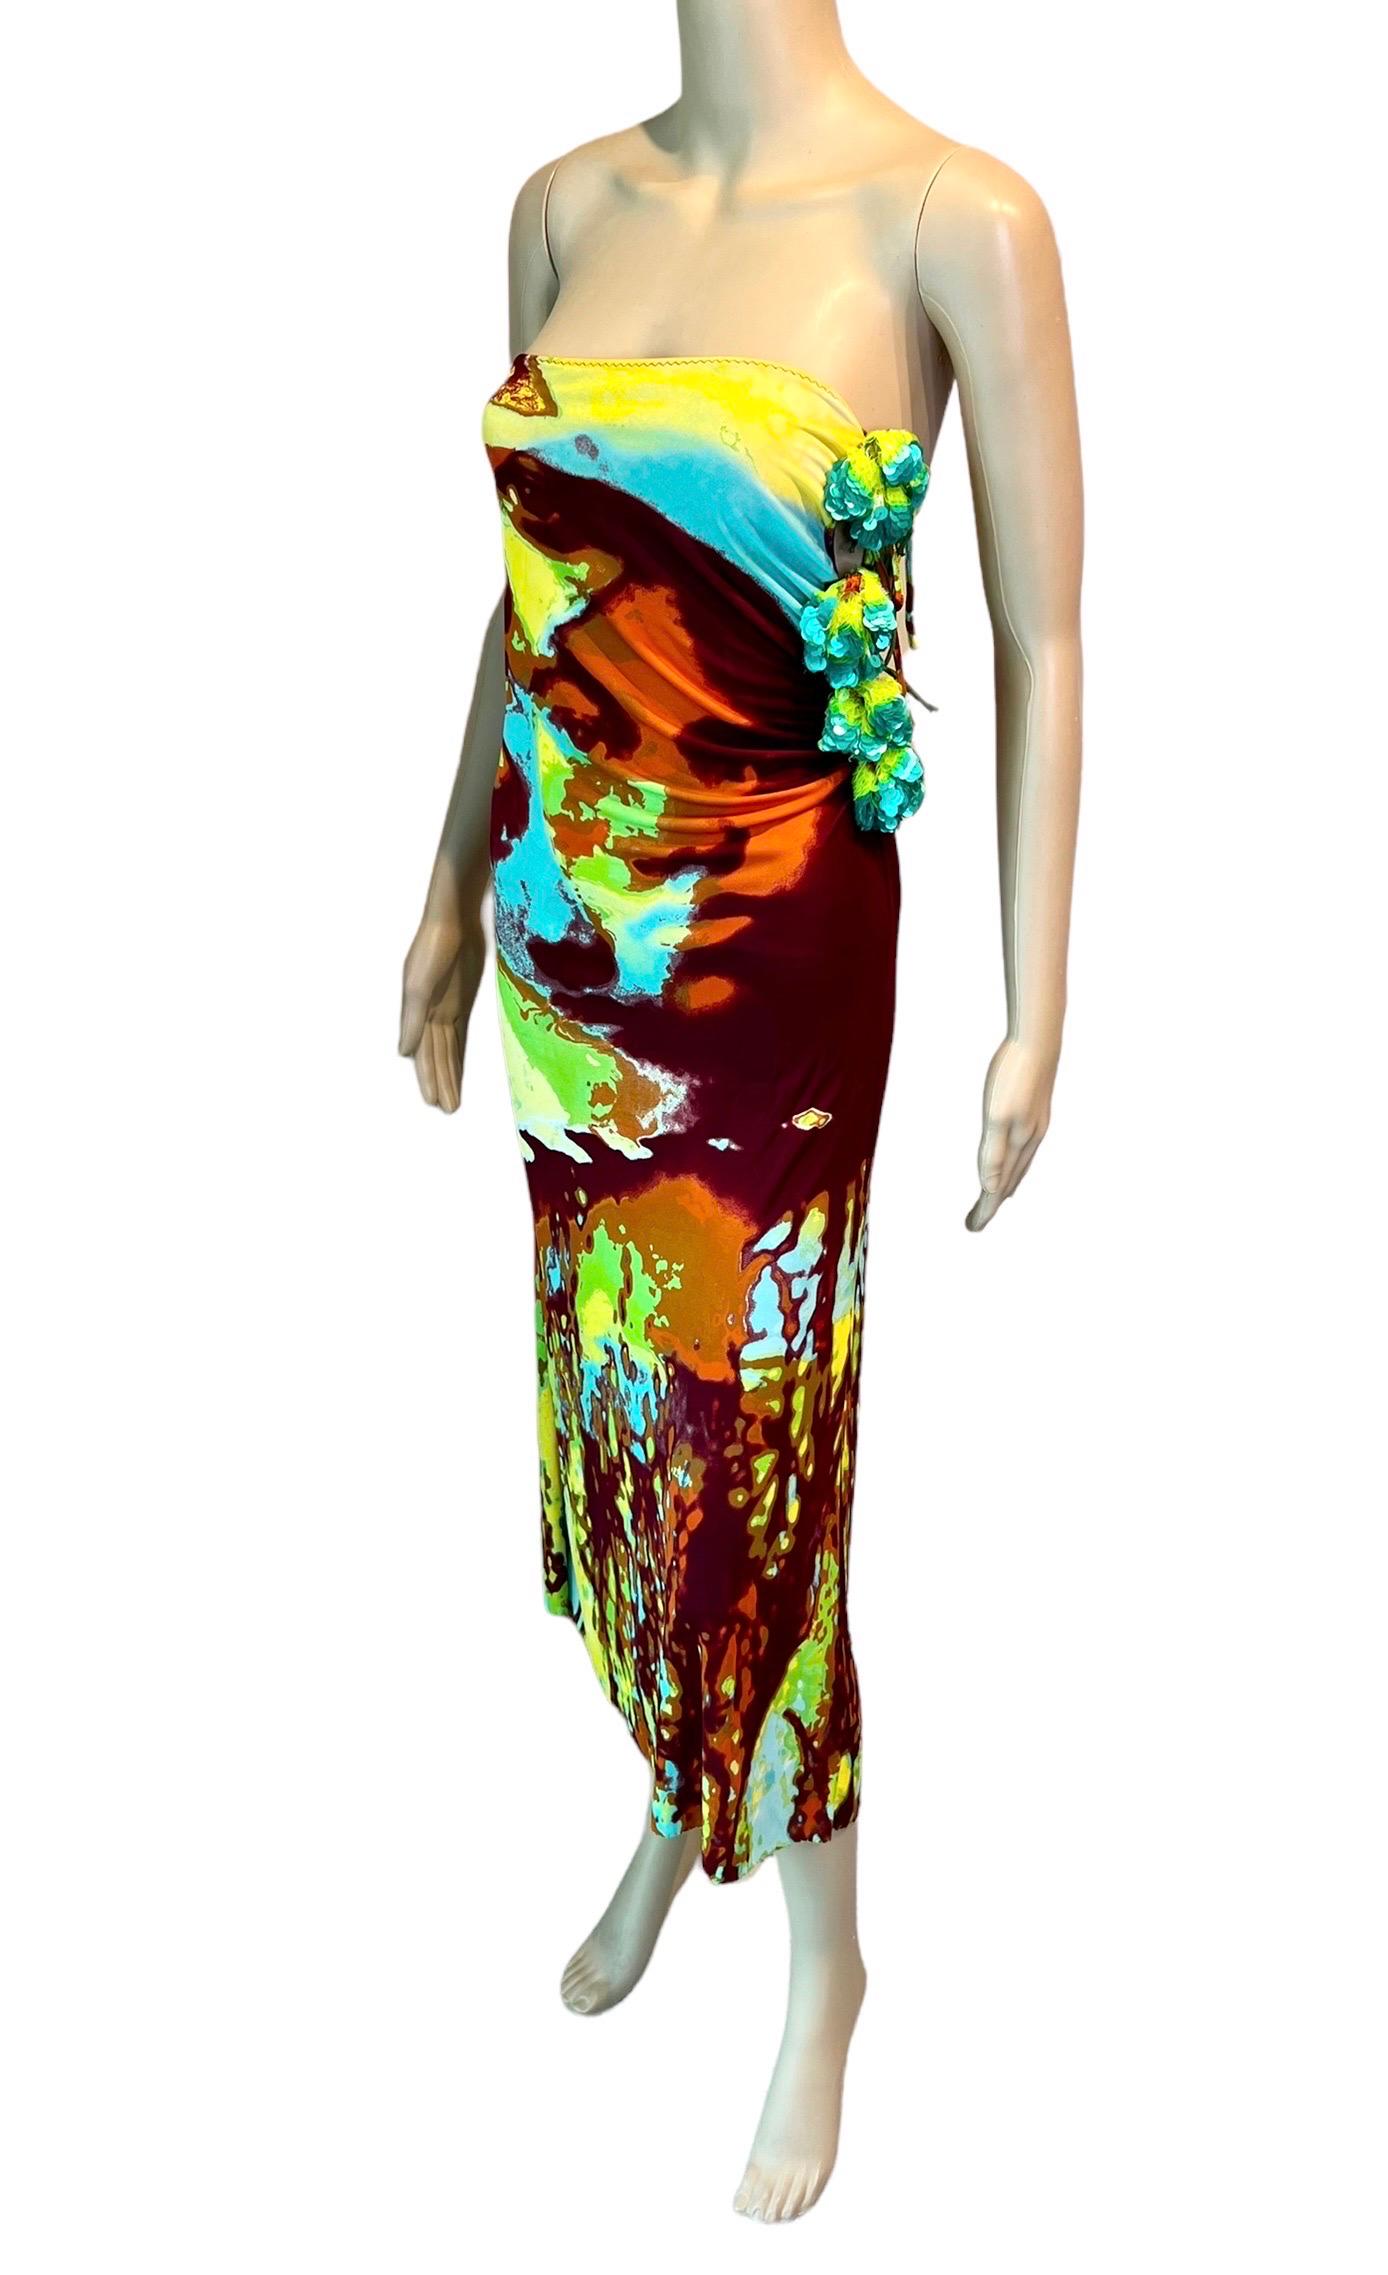 Women's Jean Paul Gaultier S/S 2000 Embellished Psychedelic Print Maxi Skirt Dress  For Sale